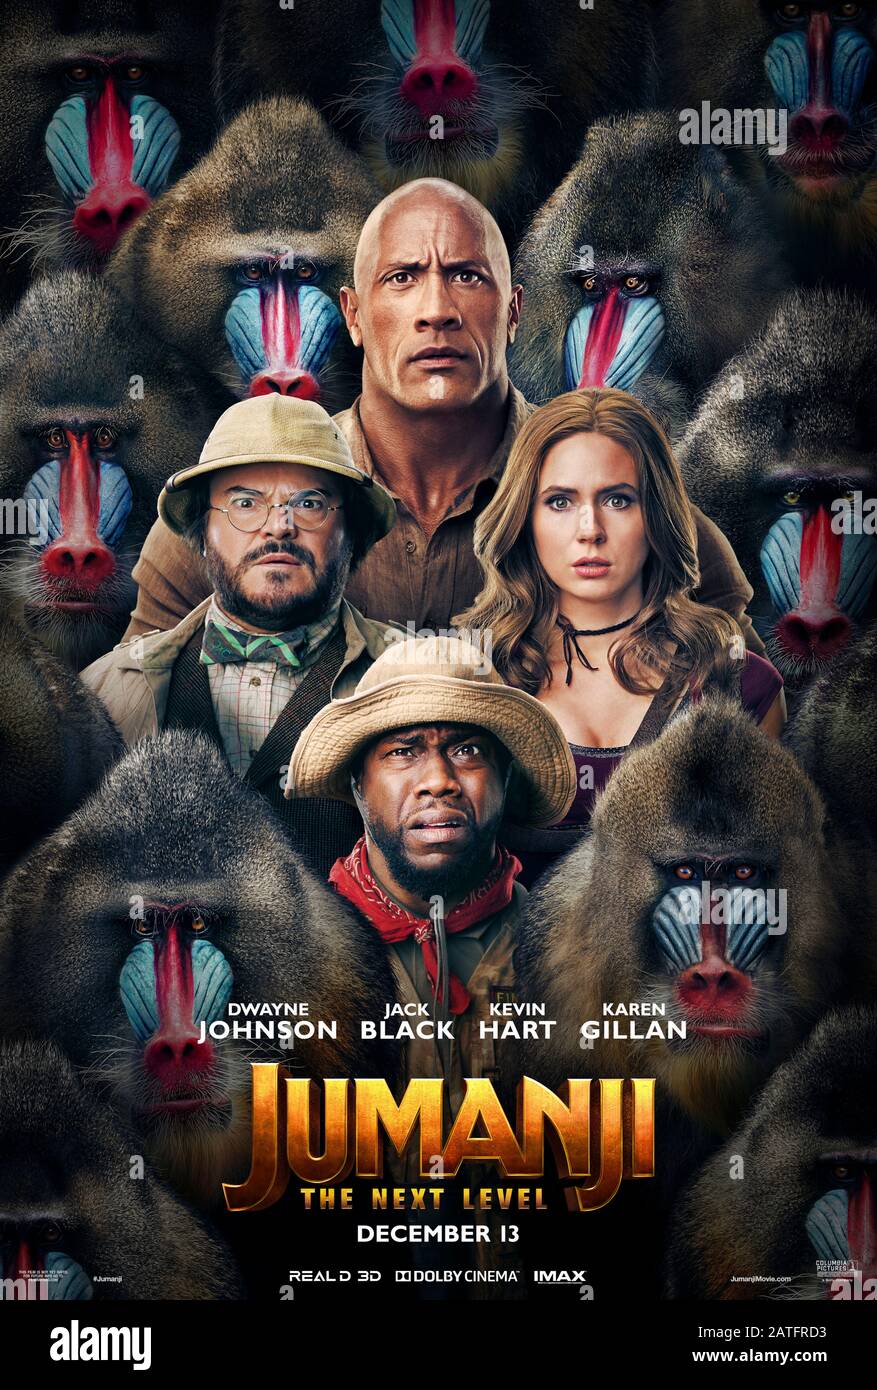 Jumanji: The Next Level (2019) directed by Jake Kasdan and starring Dwayne Johnson, Jack Black, Kevin Hart and Karen Gillan. The old video game malfunctions brings new surprises for the players. Stock Photo